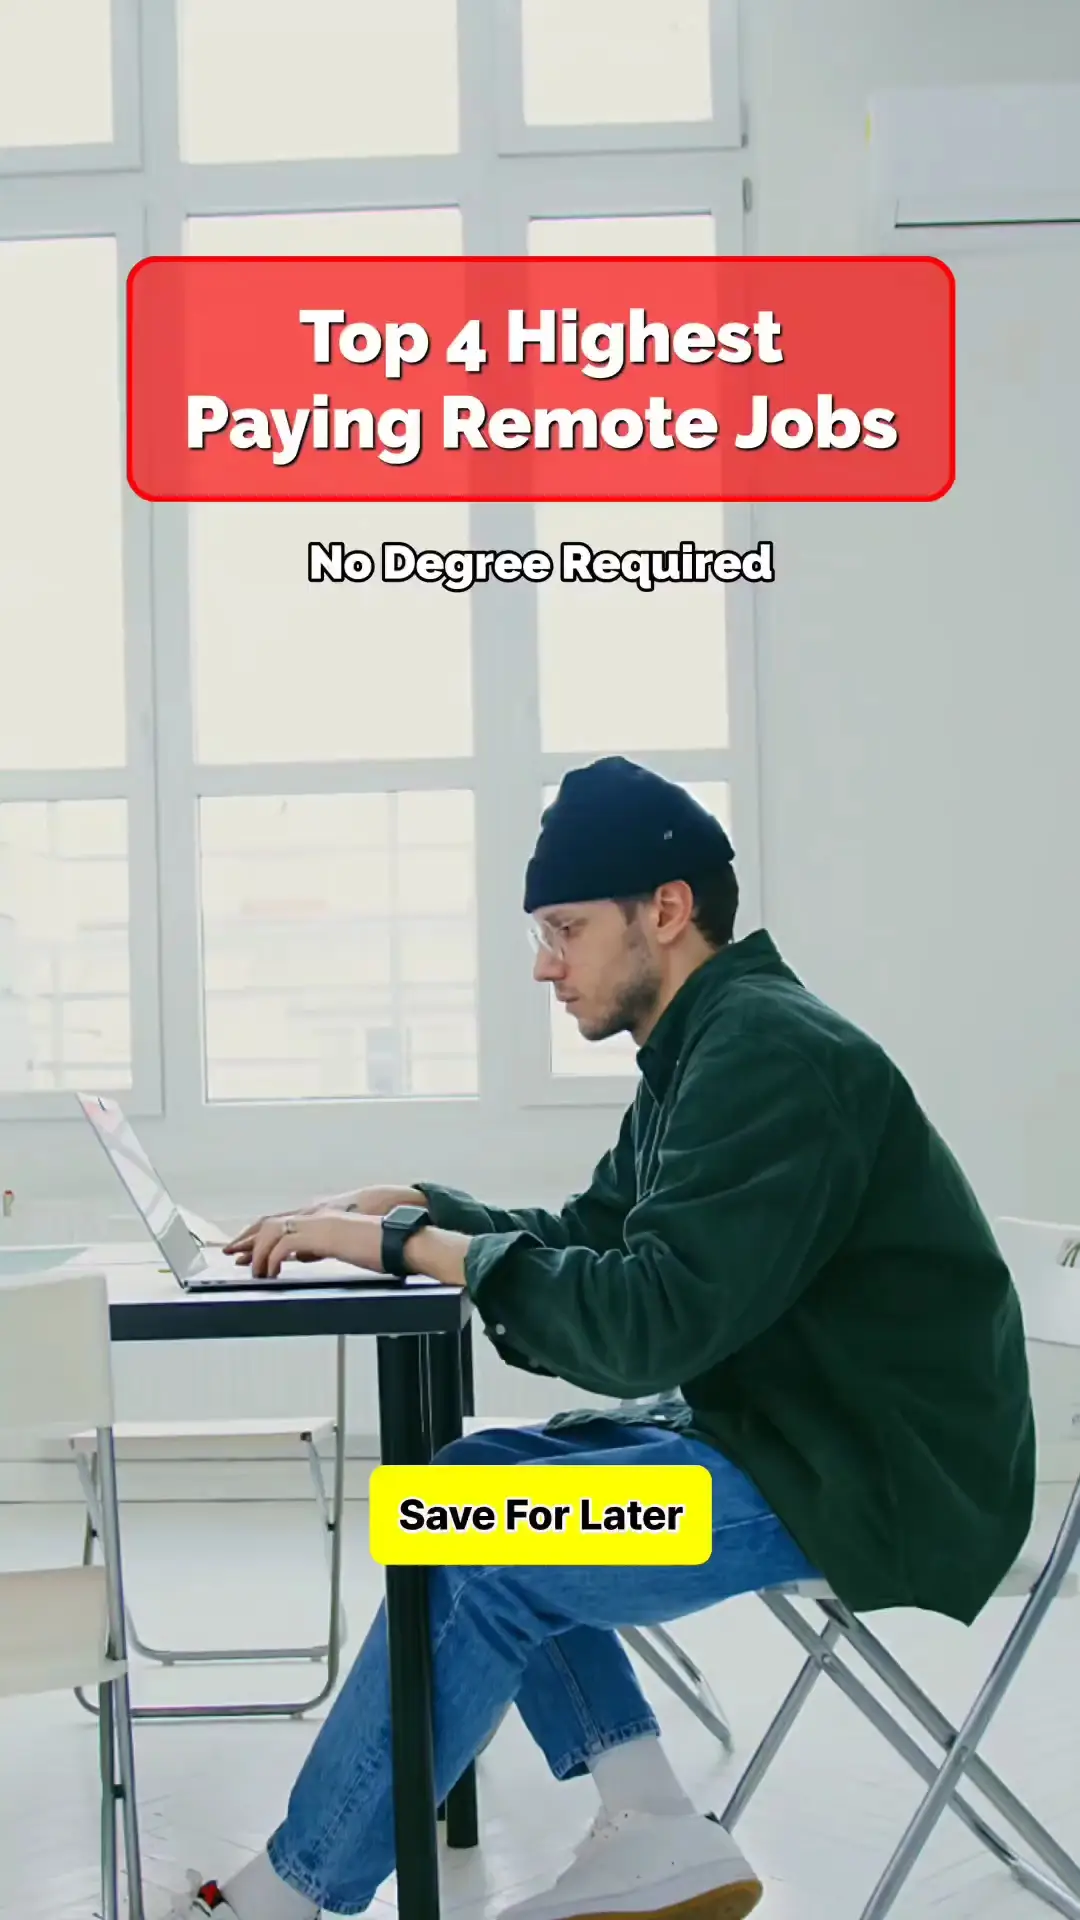 Check out these Remote Jobs that don't require a degree! 1. Rentafrien